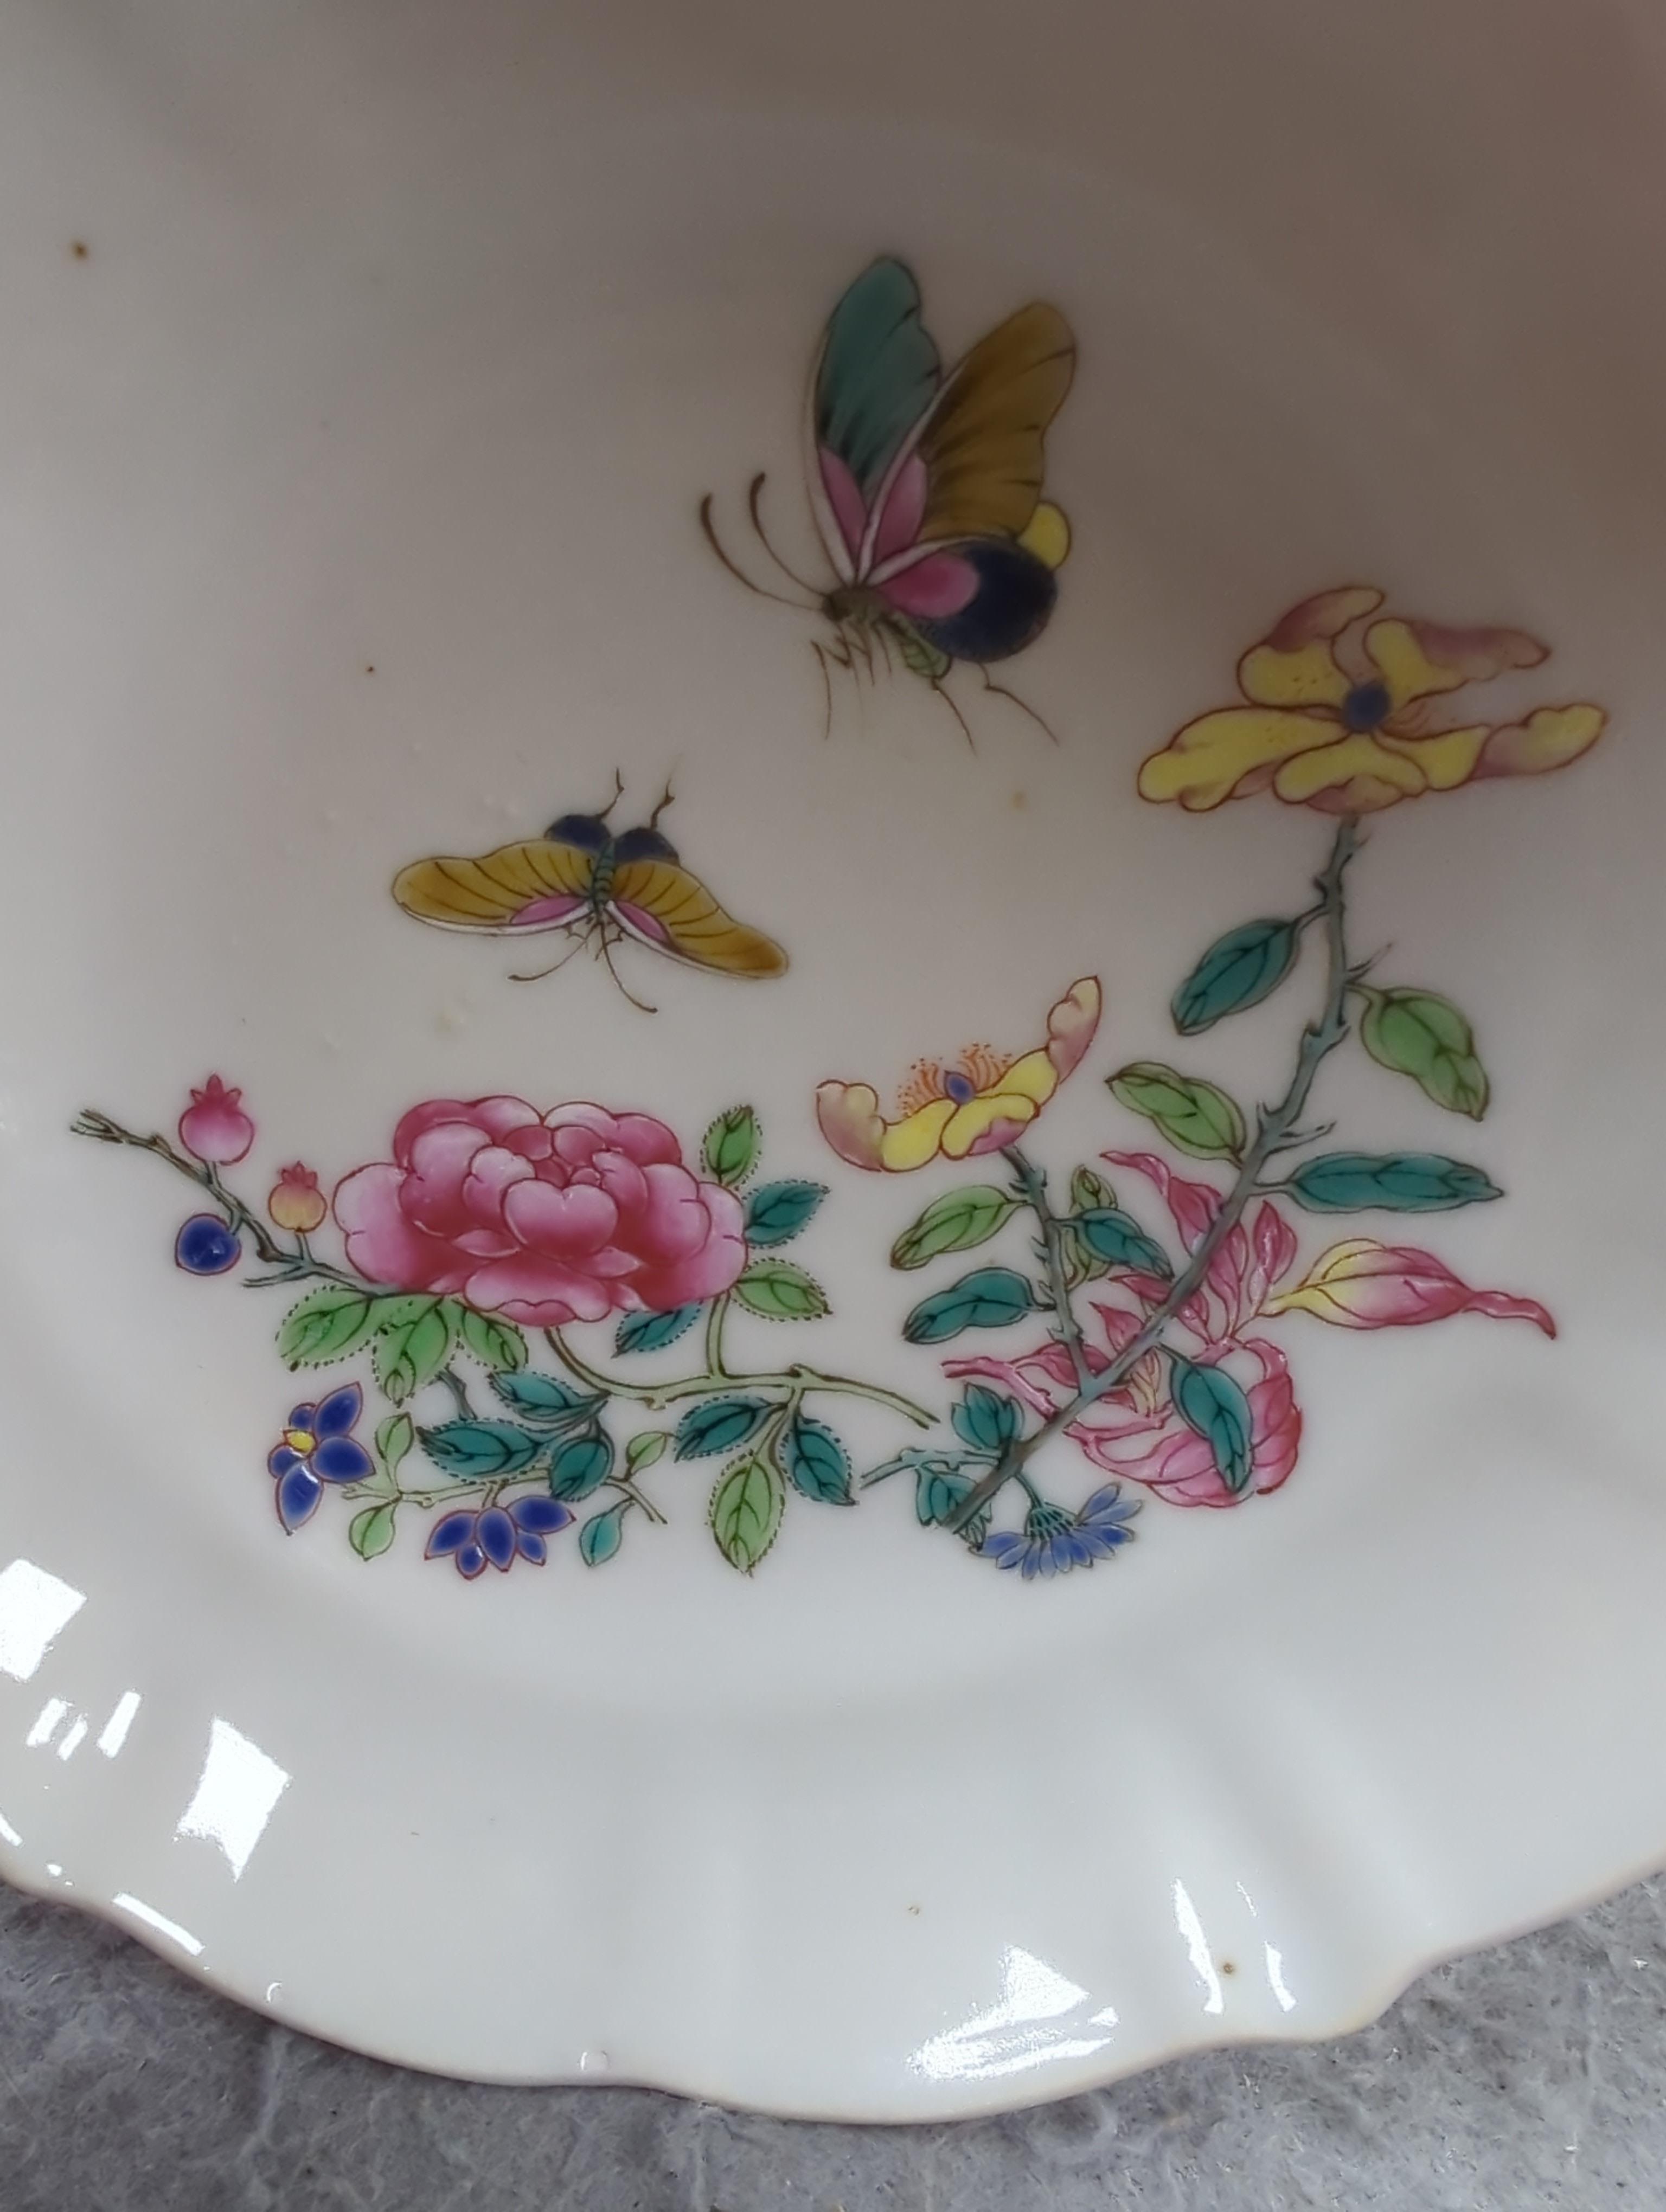 A pair of Chinese famille rose dishes, 12.5cm diameter